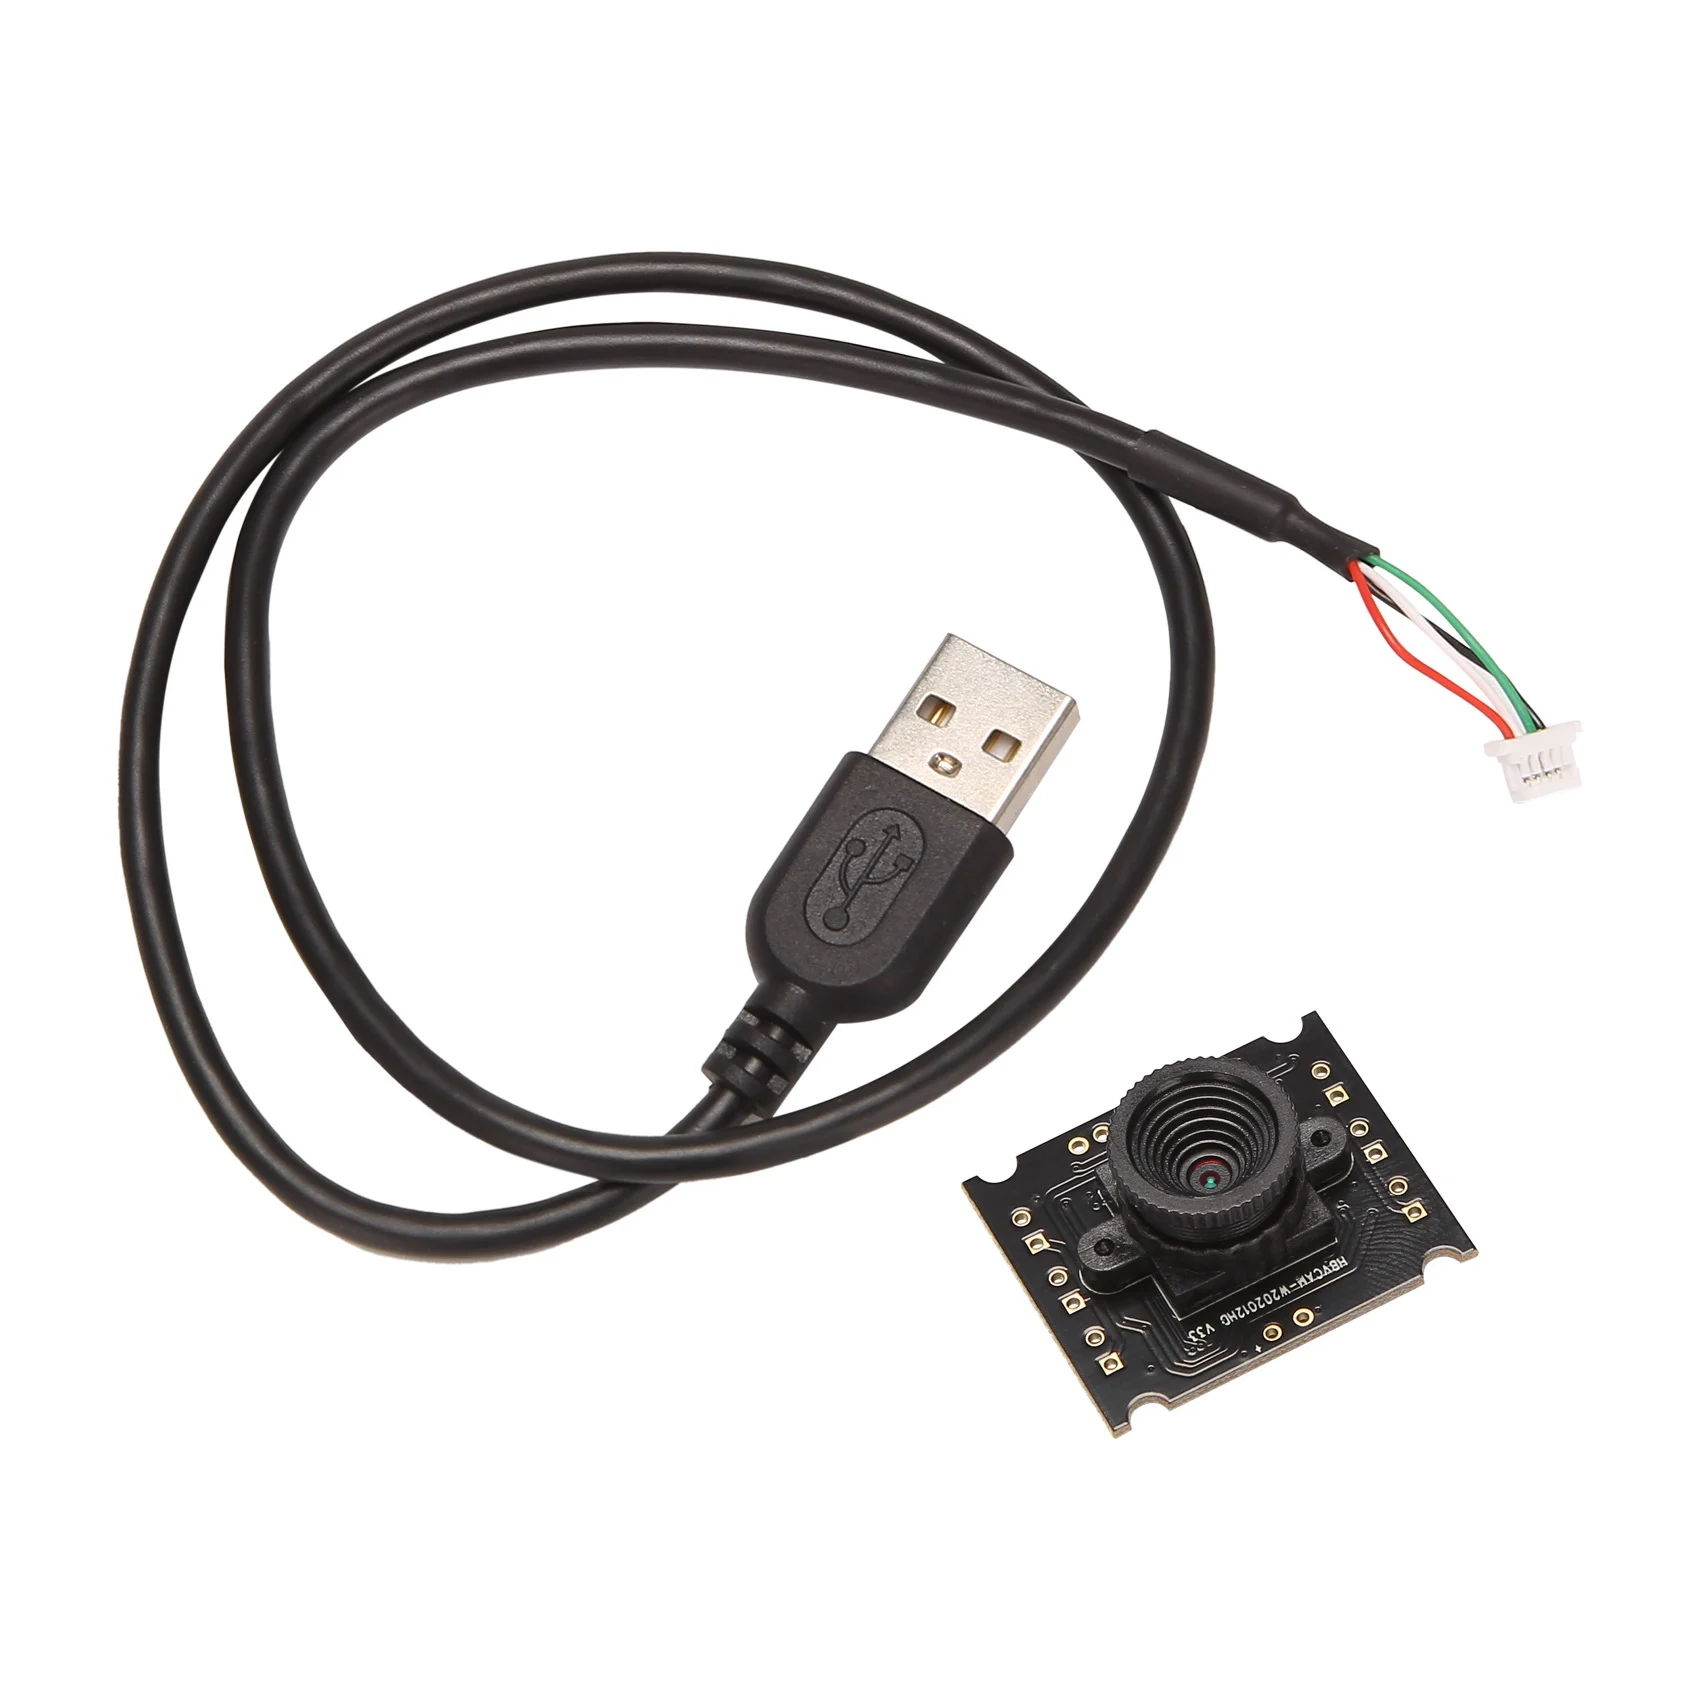 

USB Camera Module OV9726 CMOS 1MP 50 Degree Lens USB IP Camera Module for Window Android and Linux System